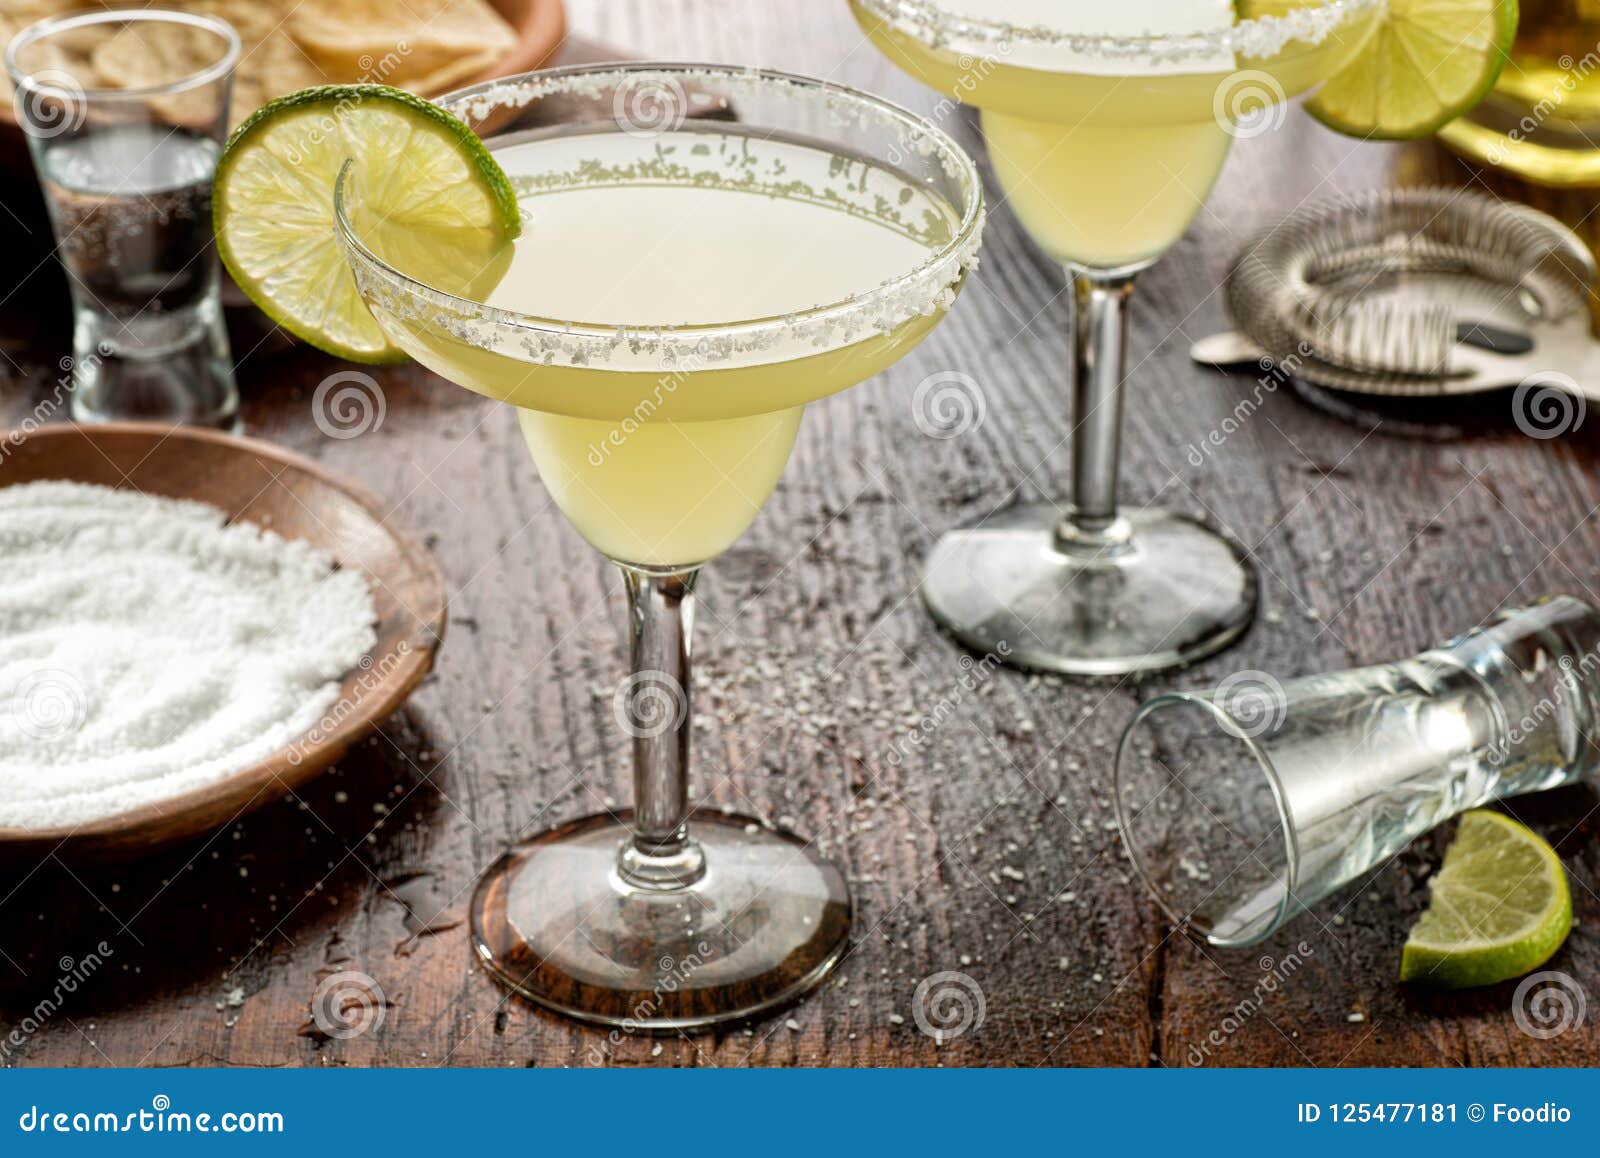 tequila and lime margaritas